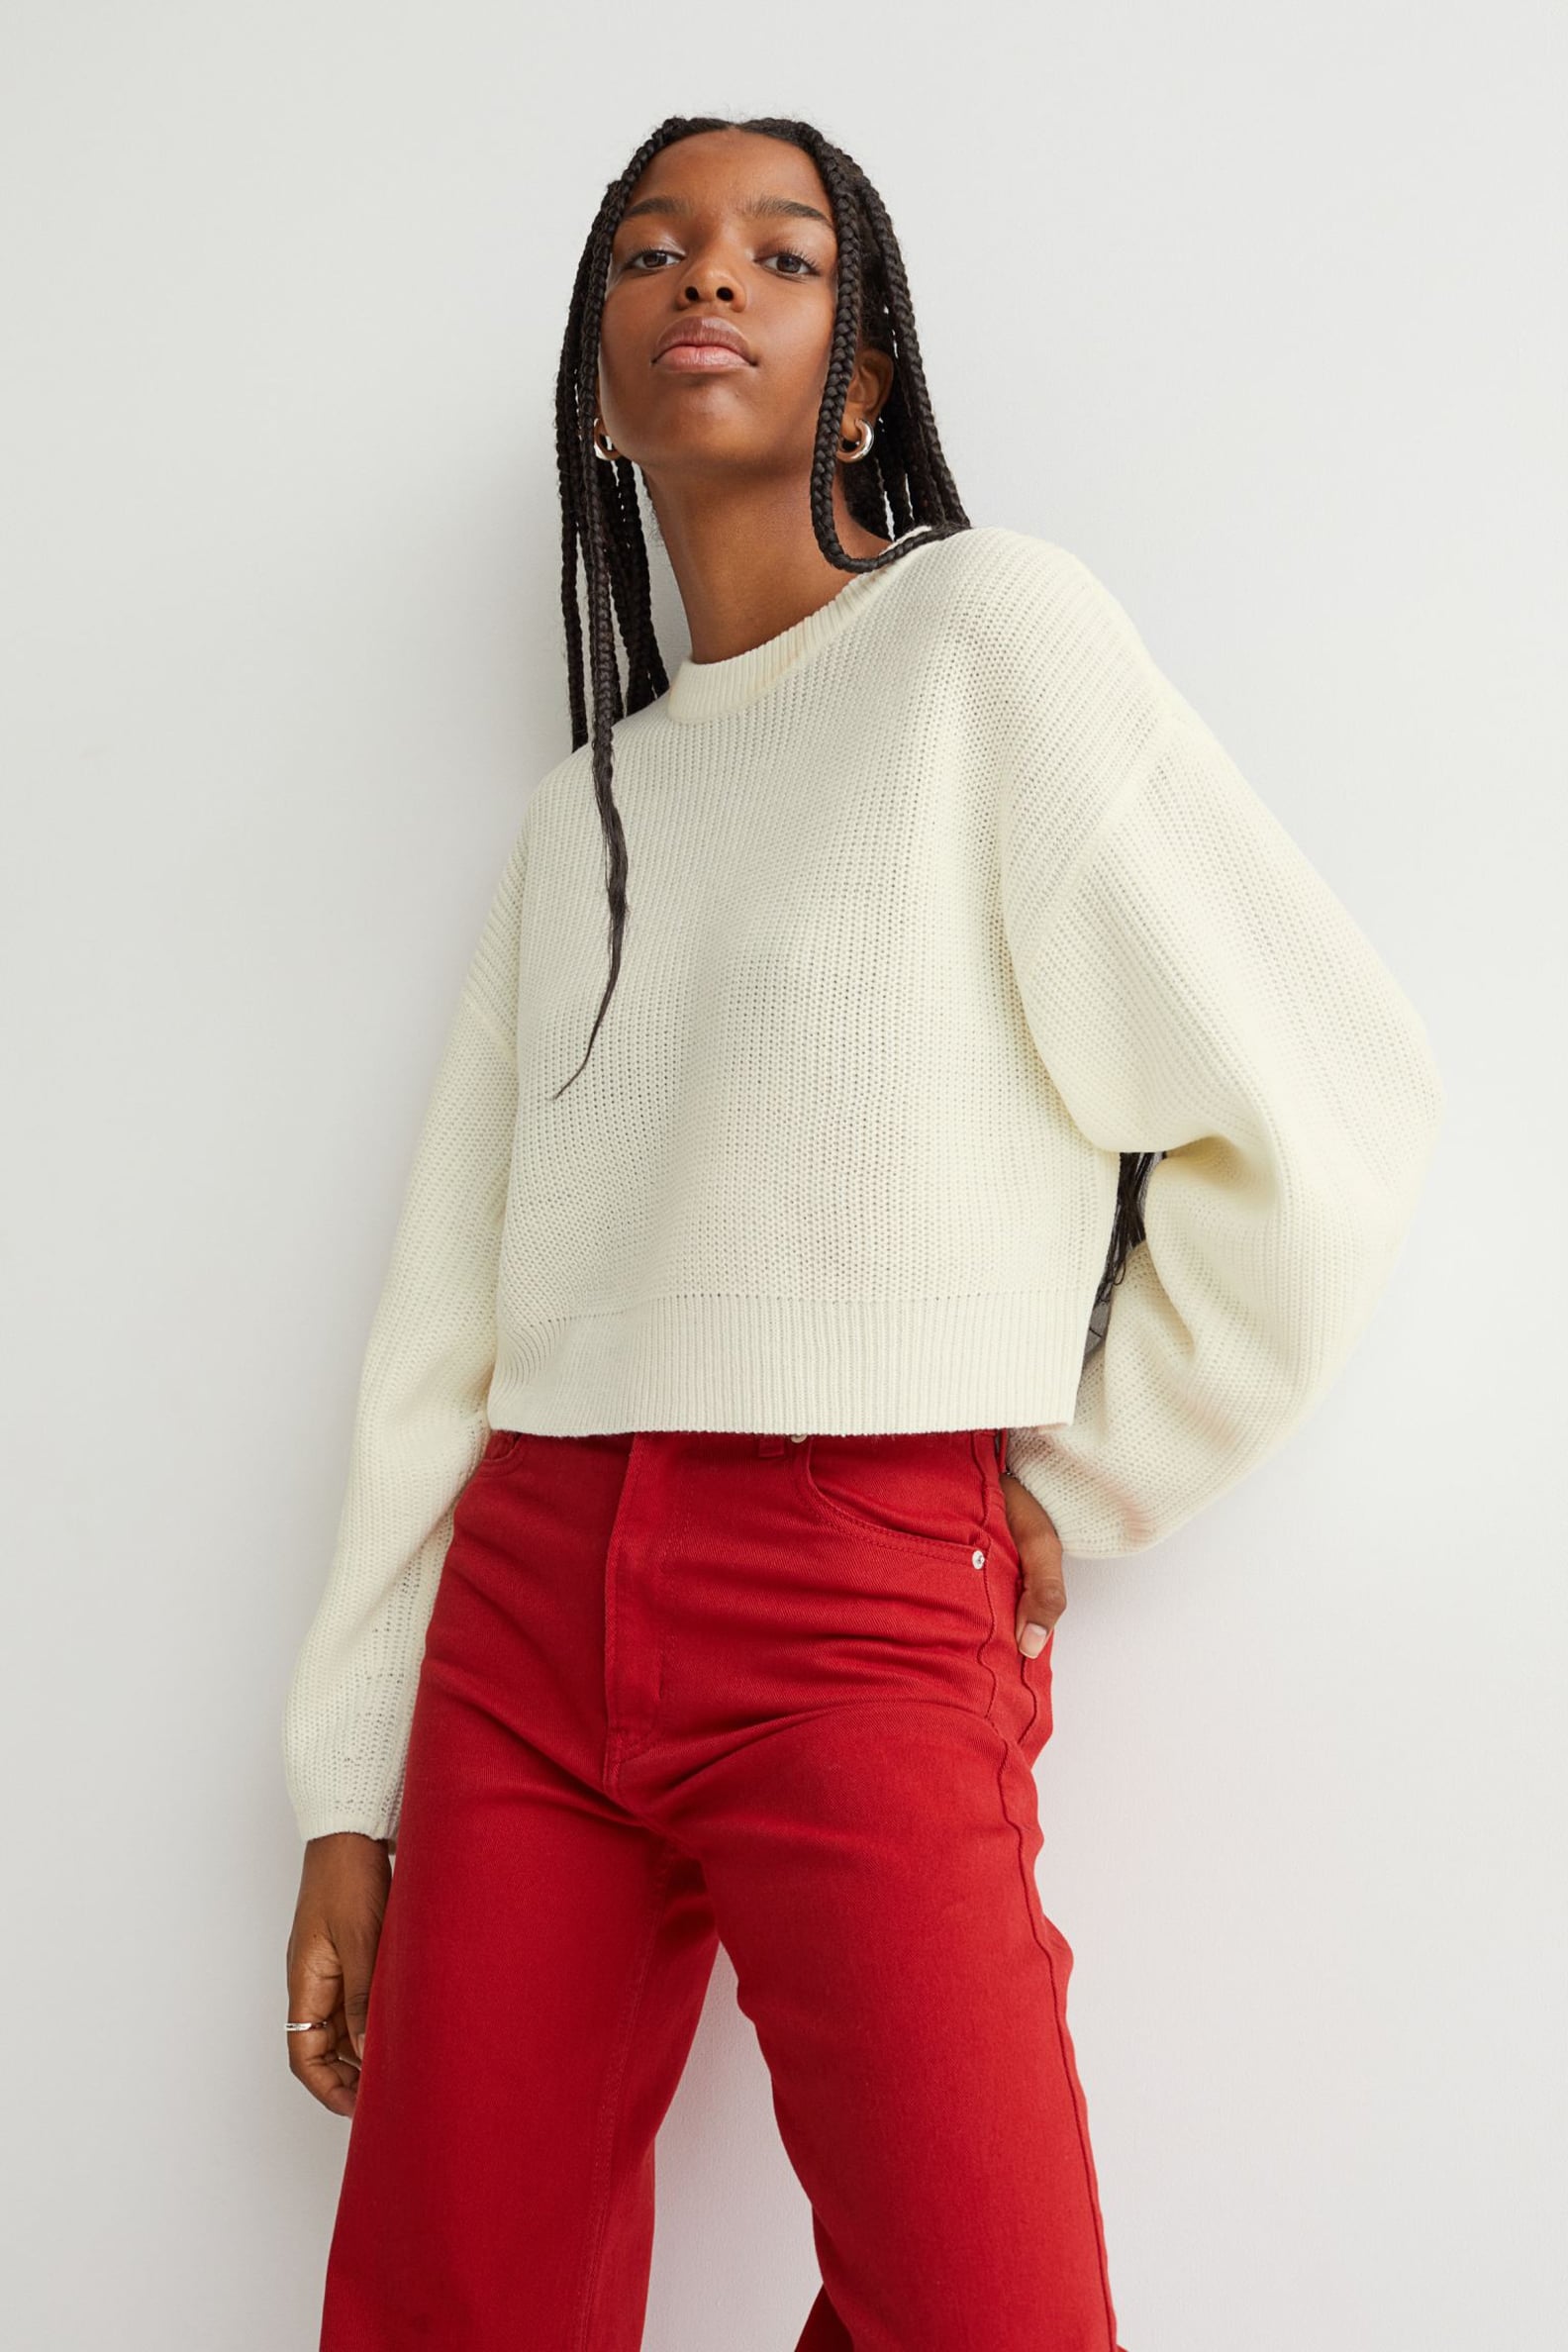 The Best, Most Stylish Sweaters For Women Under $50 | POPSUGAR Fashion